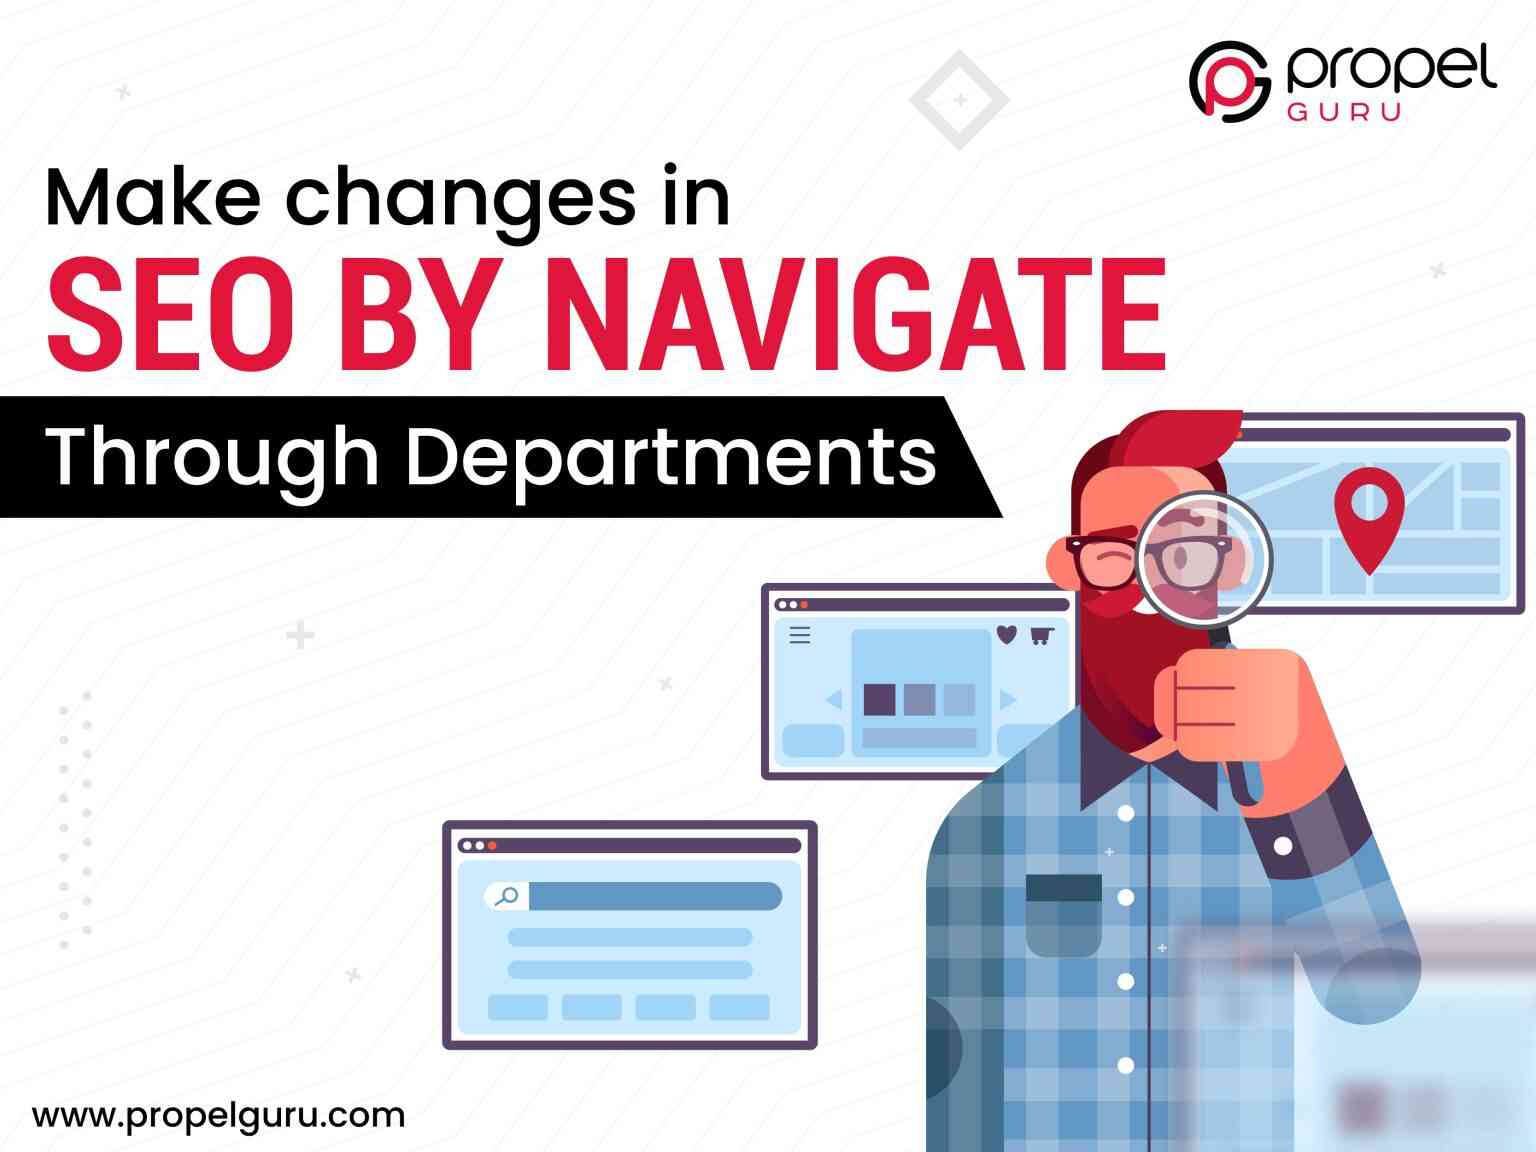 You are currently viewing Navigate Through Departments: The Key to Make Impactful Changes in SEO